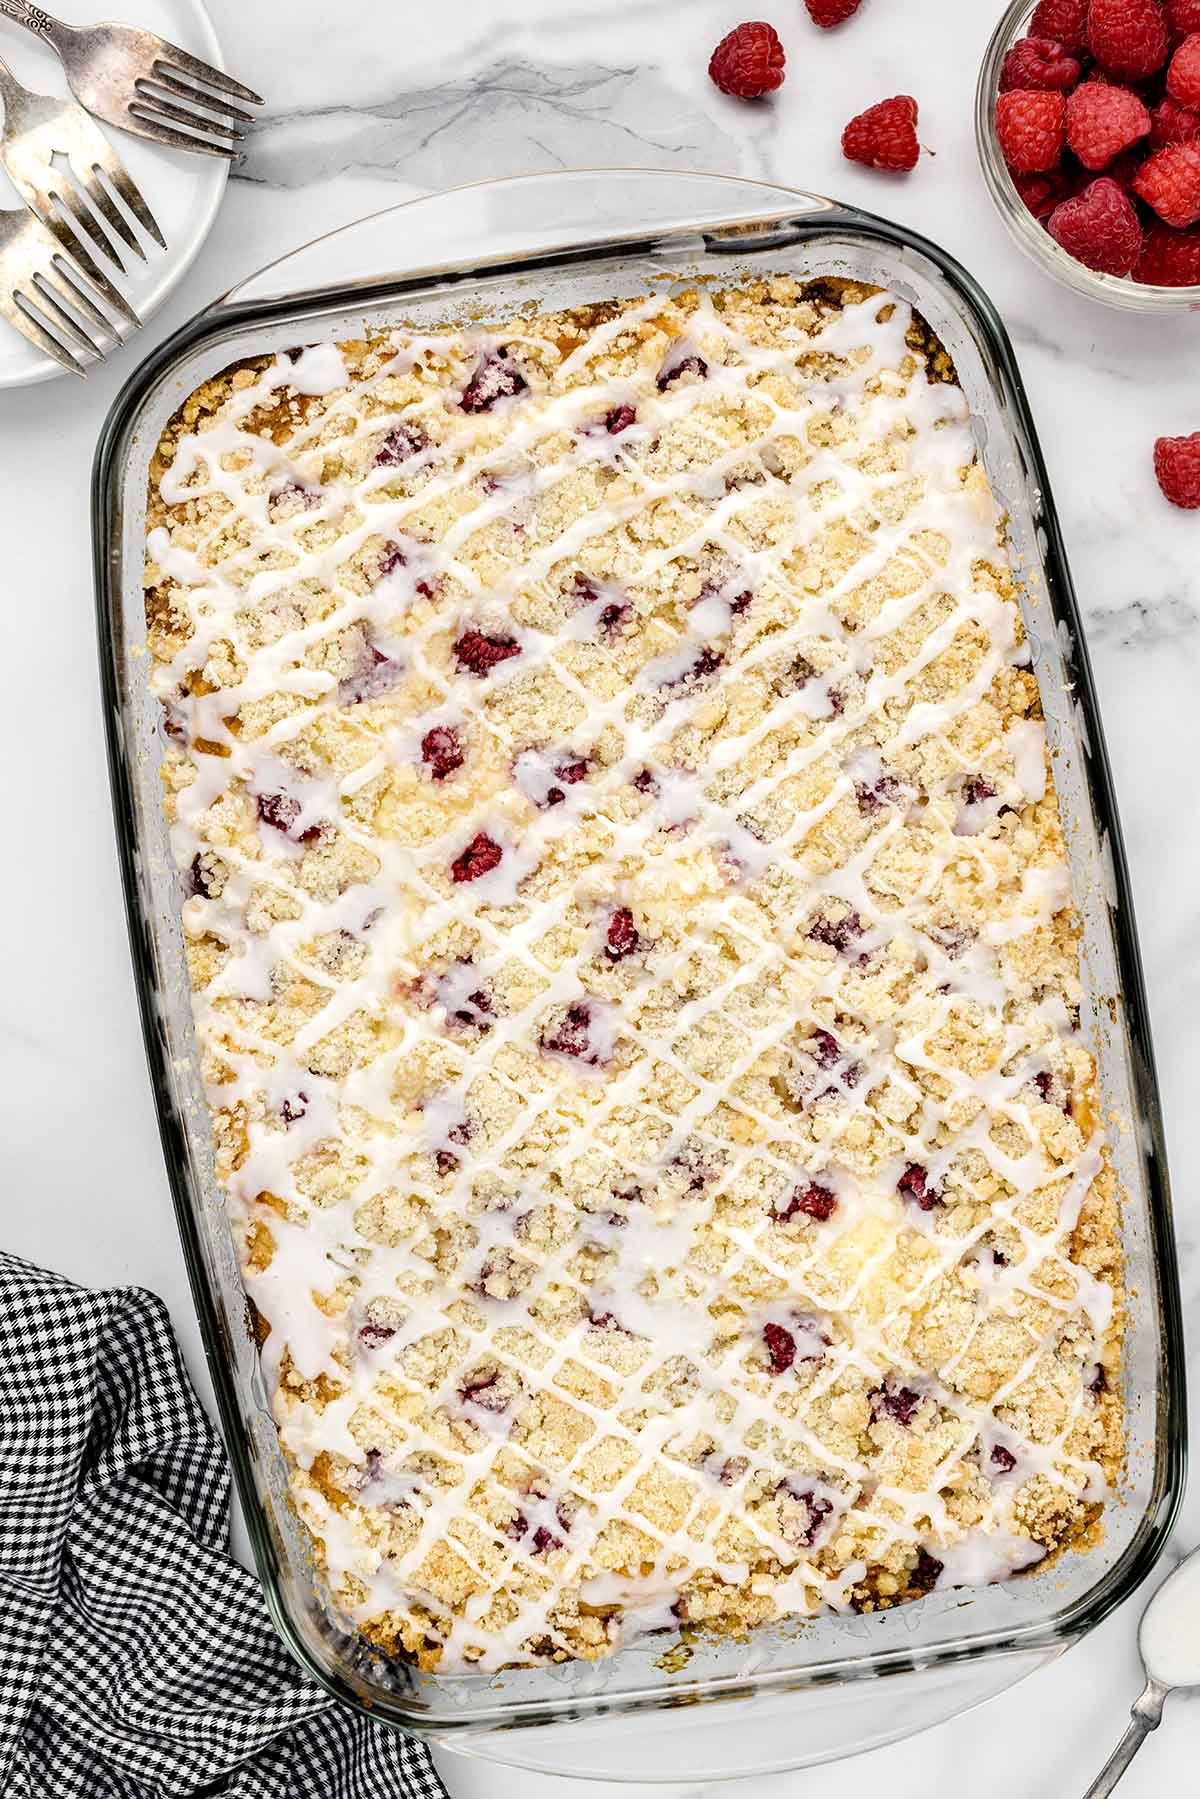 Raspberry Coffee Cake in a baking dish drizzled with glaze on top.